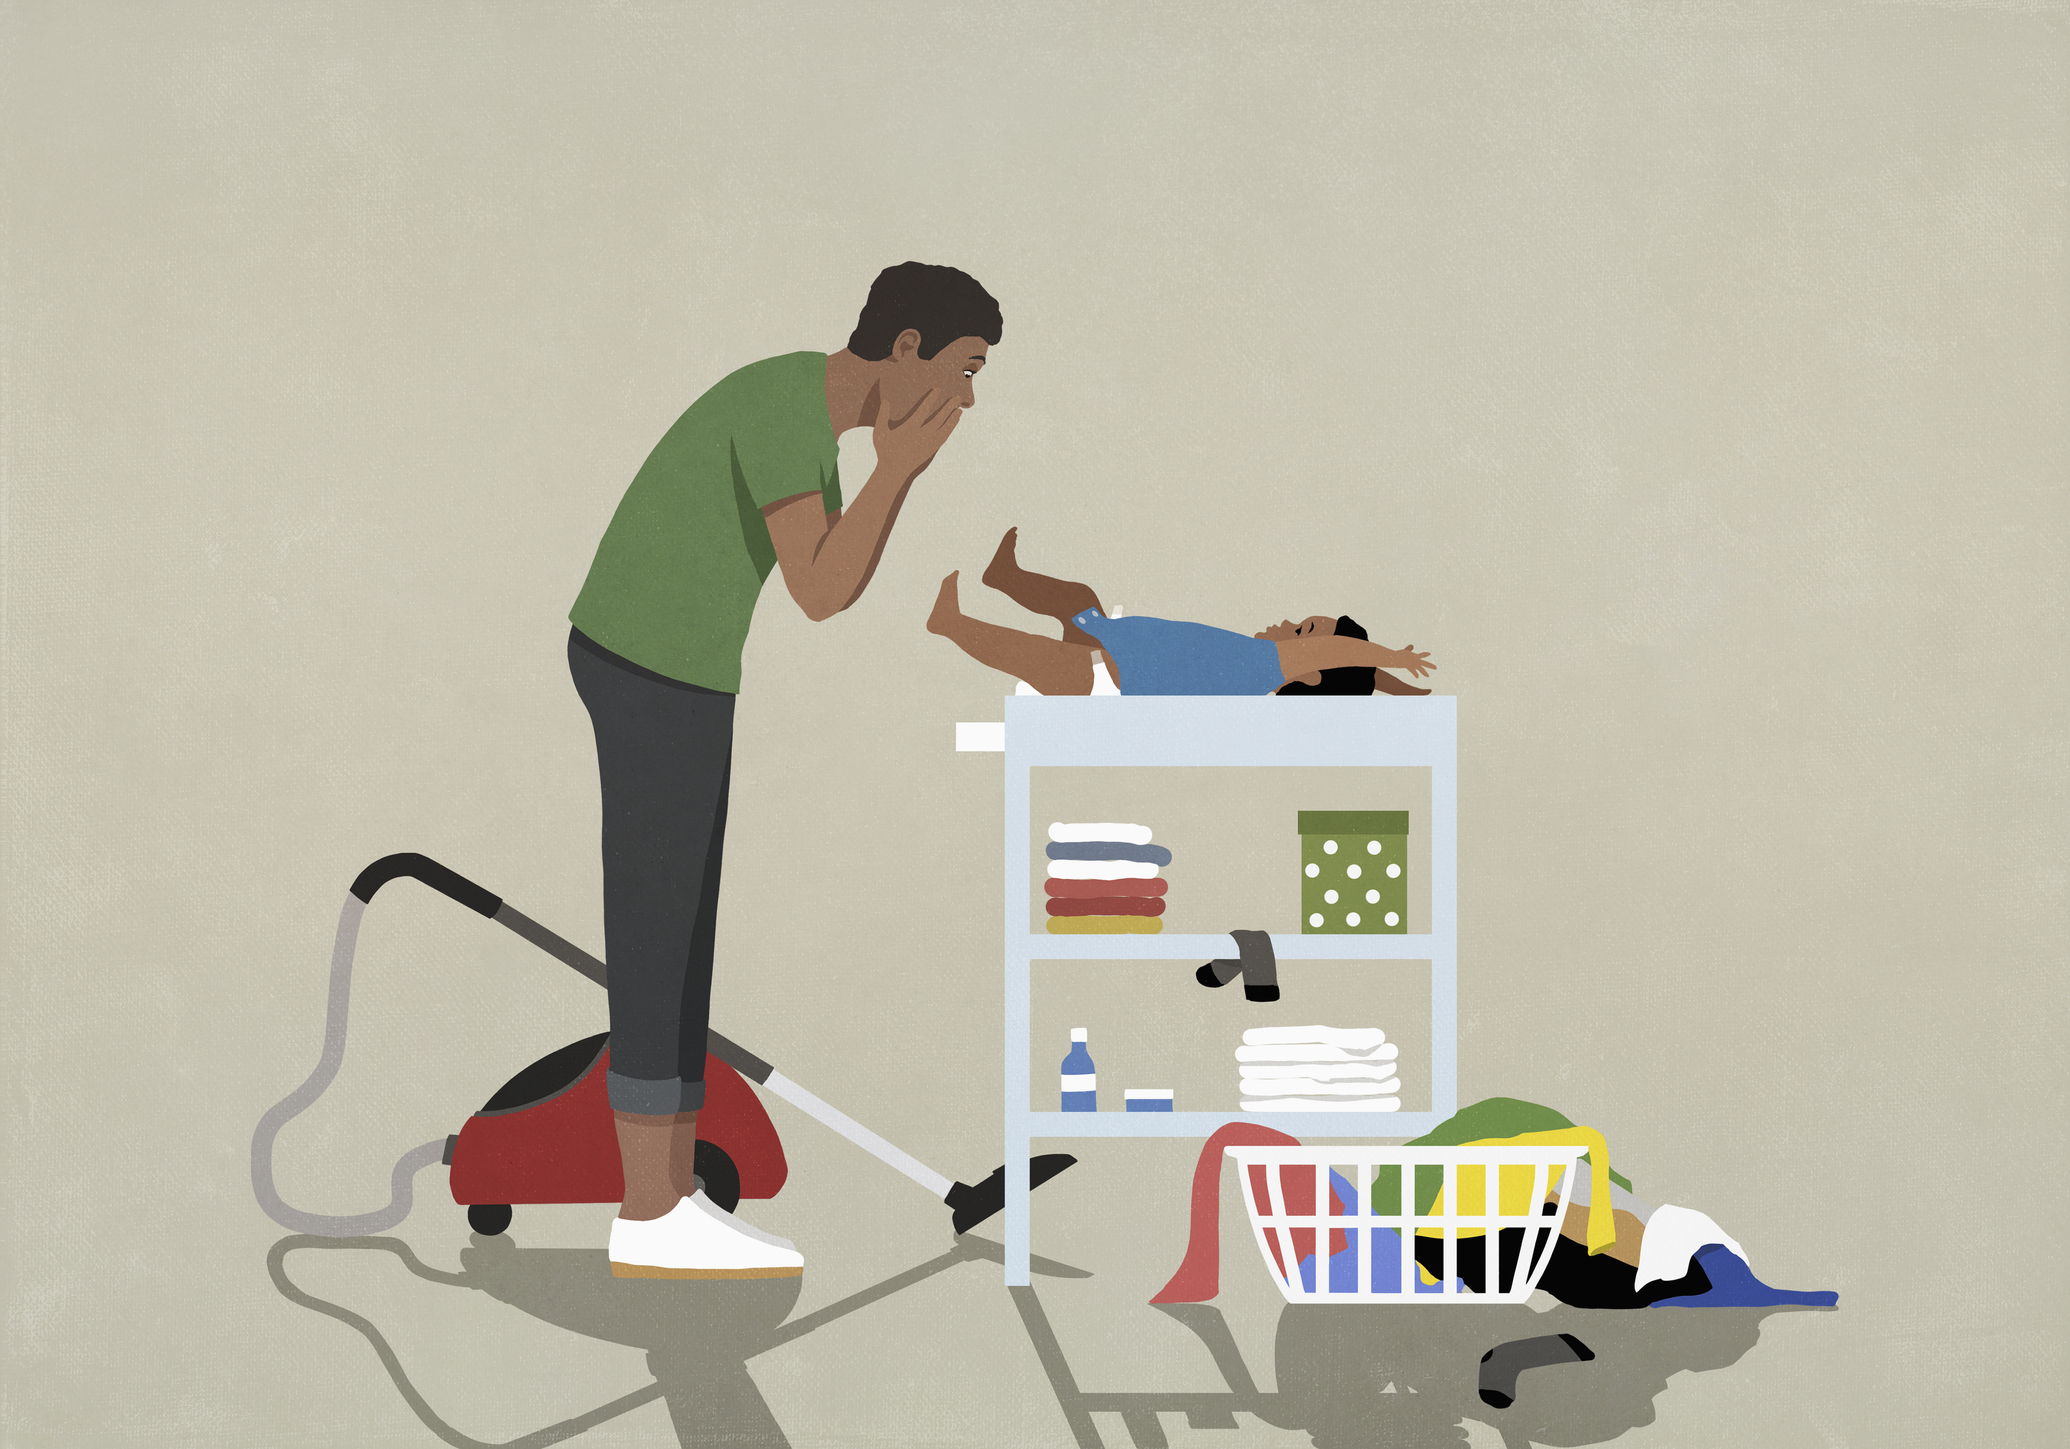 Illustration of a father looking surprised at a baby on a changing table, surrounded by a pile of laundry and a vacuum cleaner.